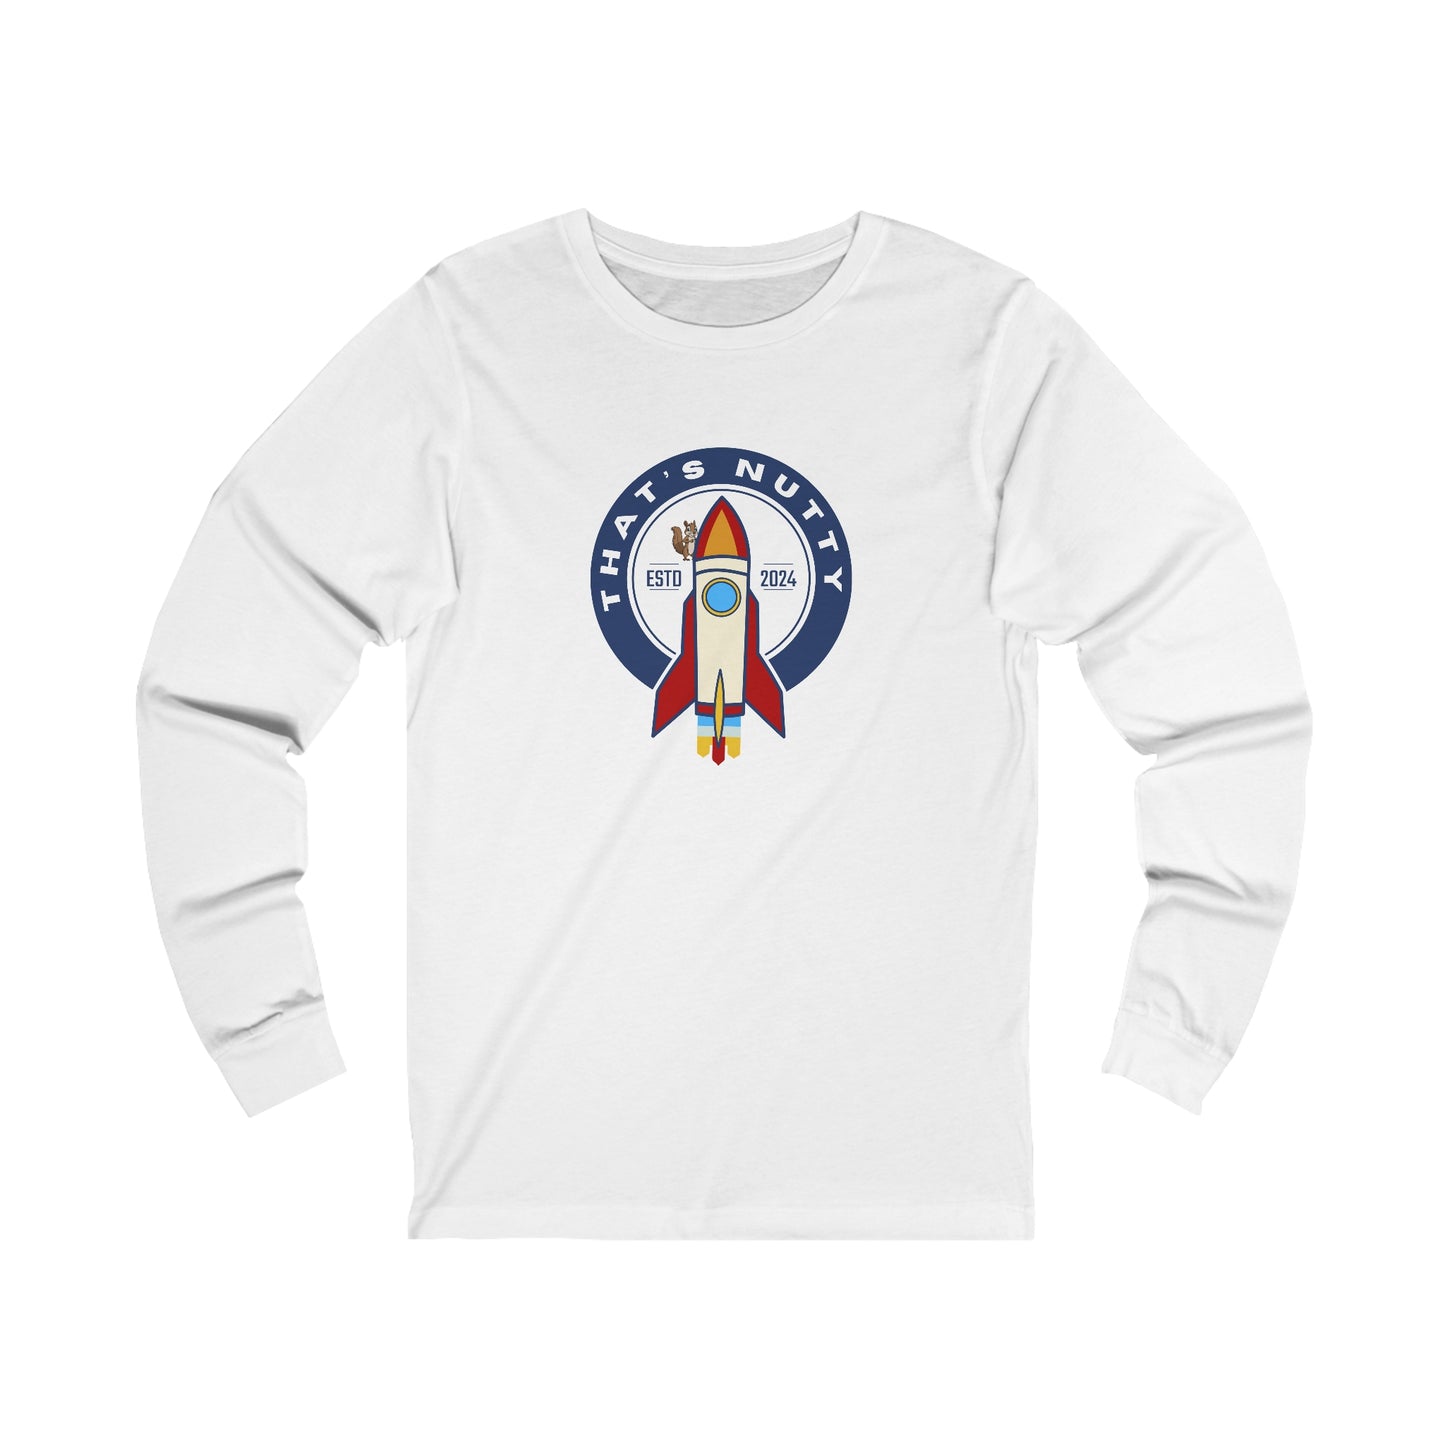 That's Nutty On A Rocket Ship. Unisex Jersey Long Sleeve Tee